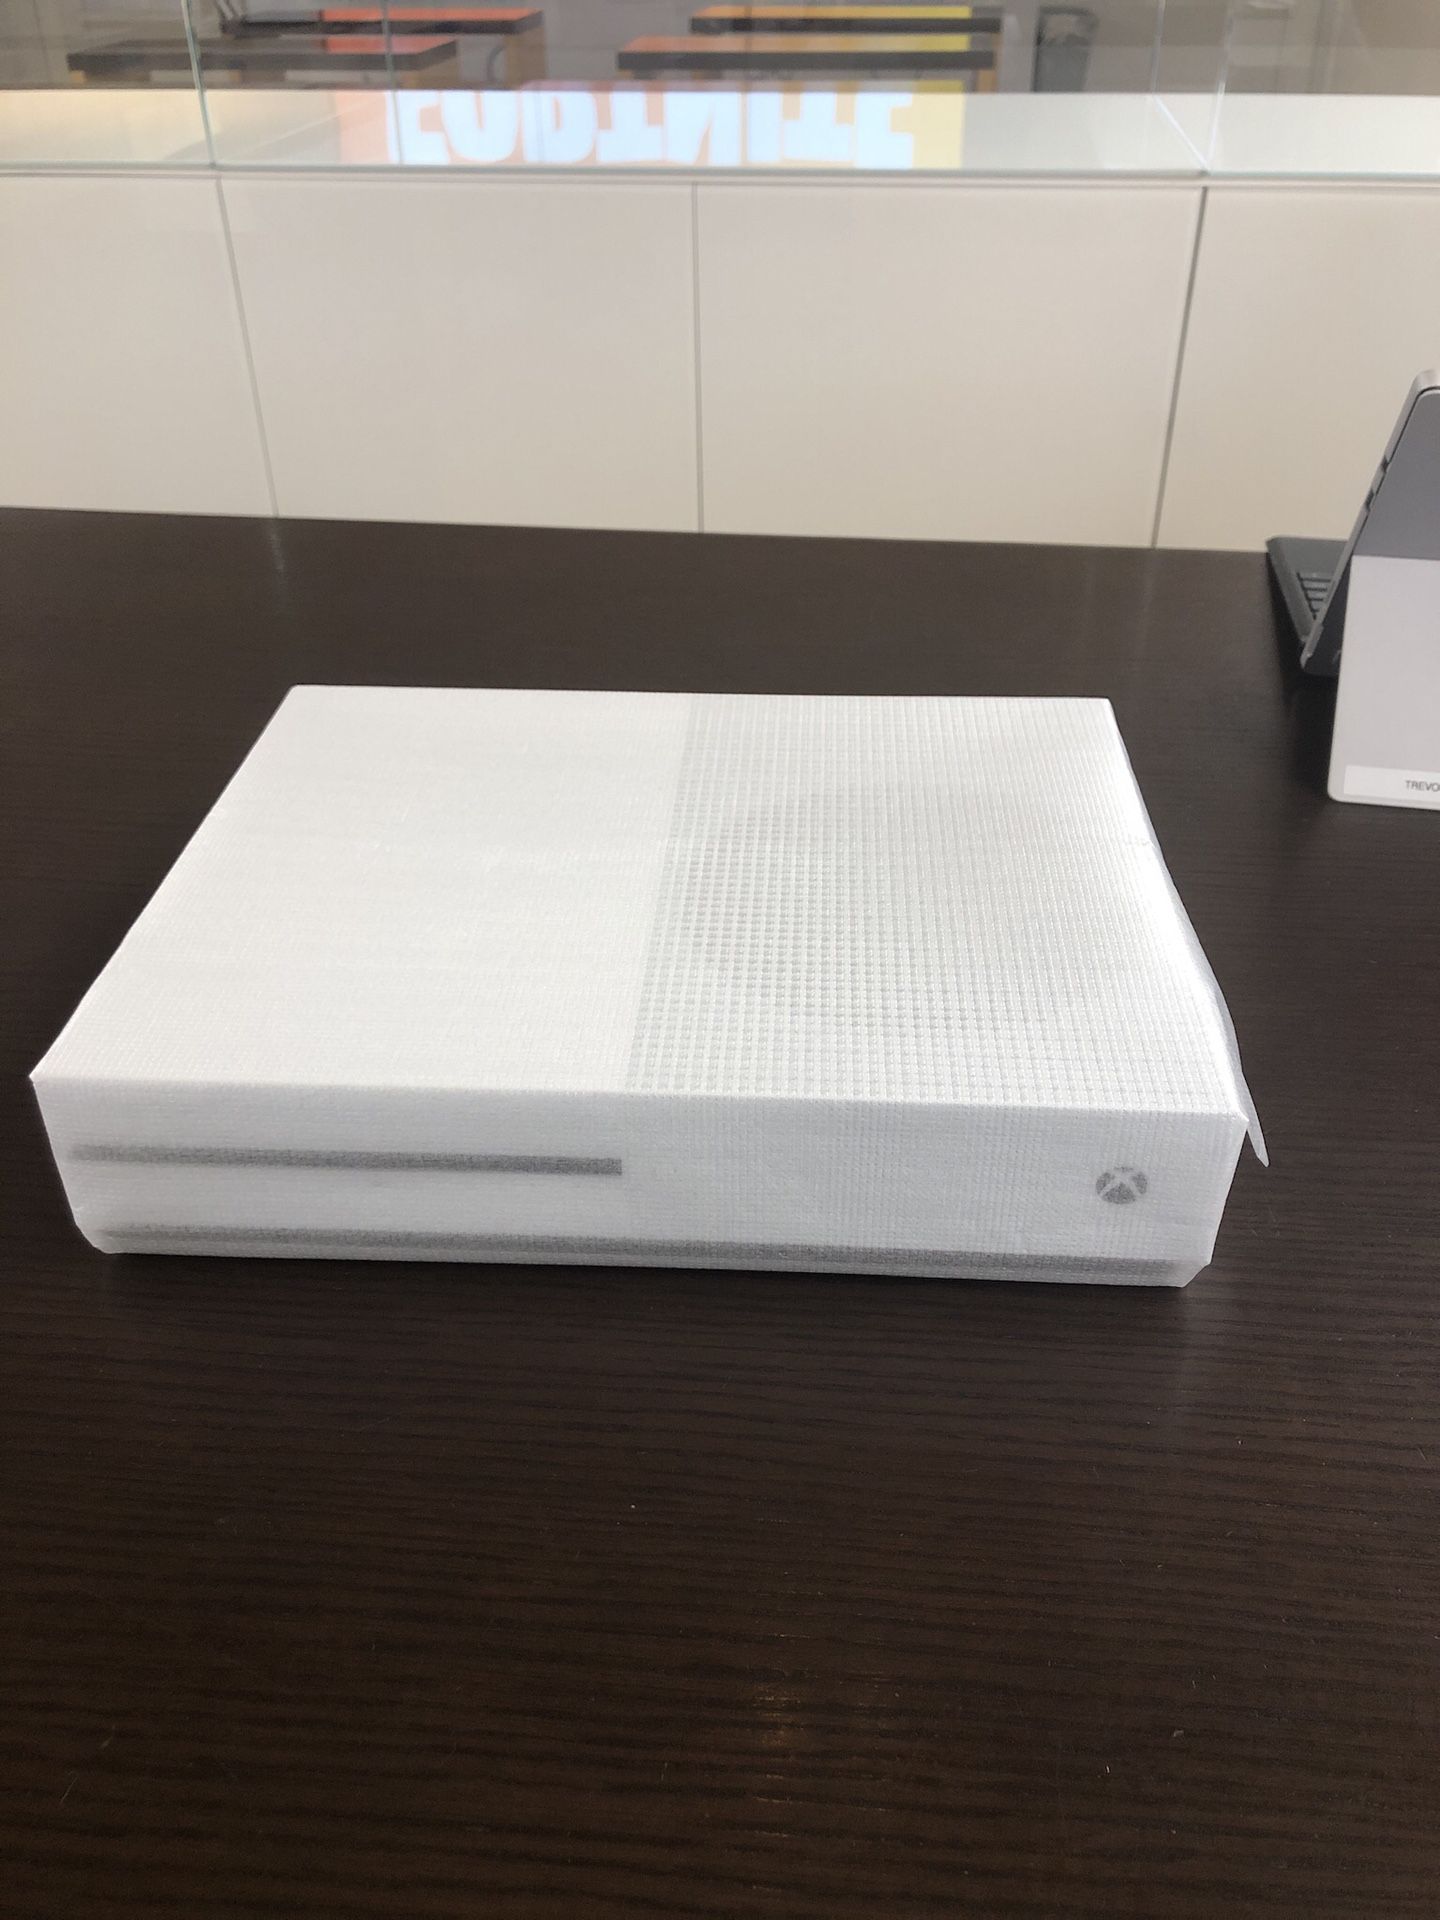 Xbox One S - 2TB w/ controller and cords